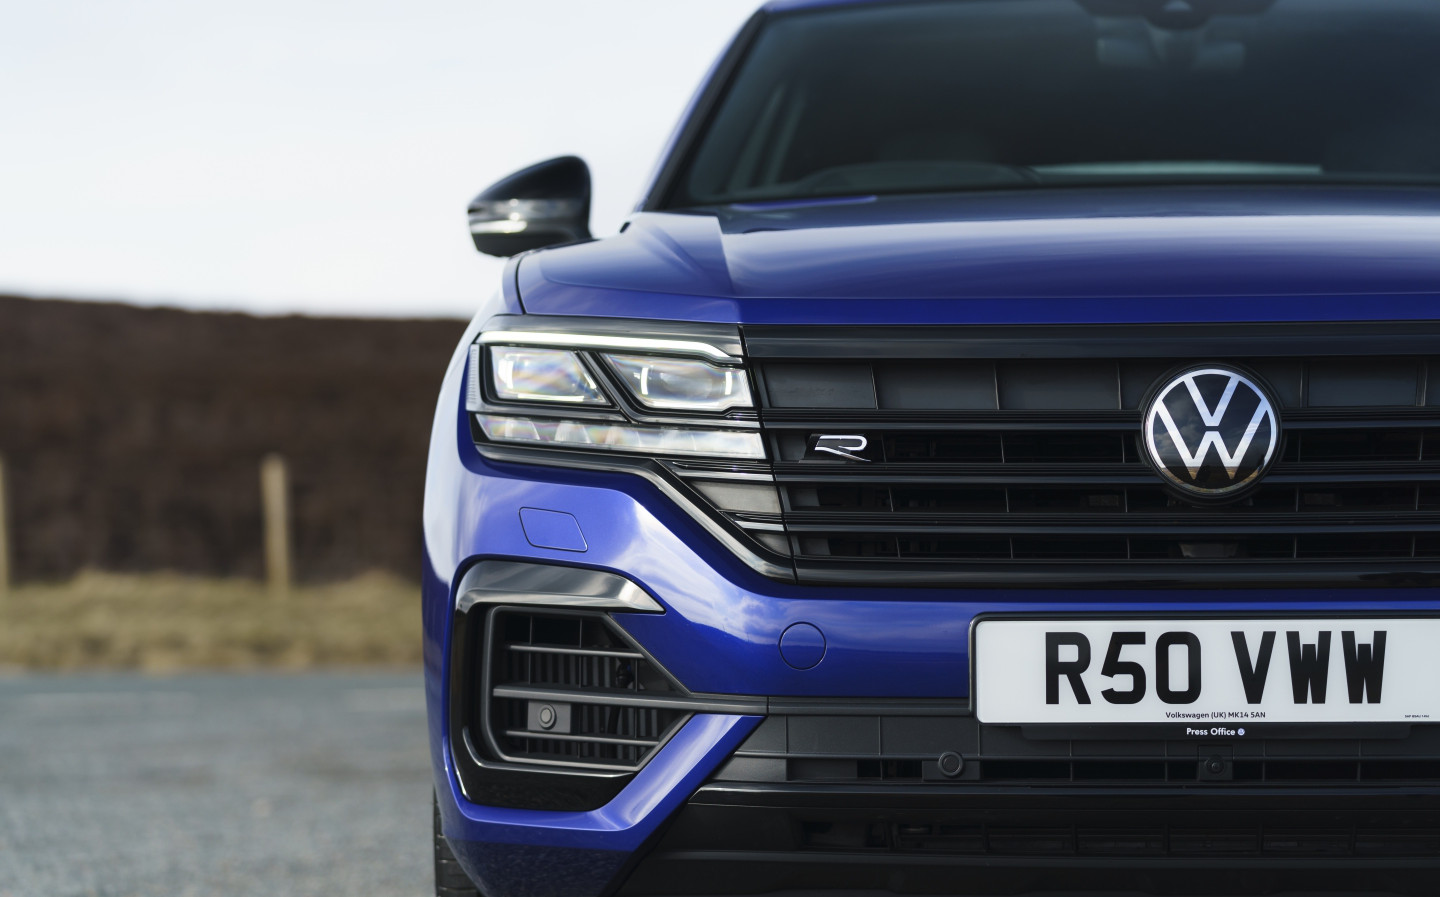 Jeremy Clarkson thinks the Volkswagen Touareg is the closest competitor to the Range Rover